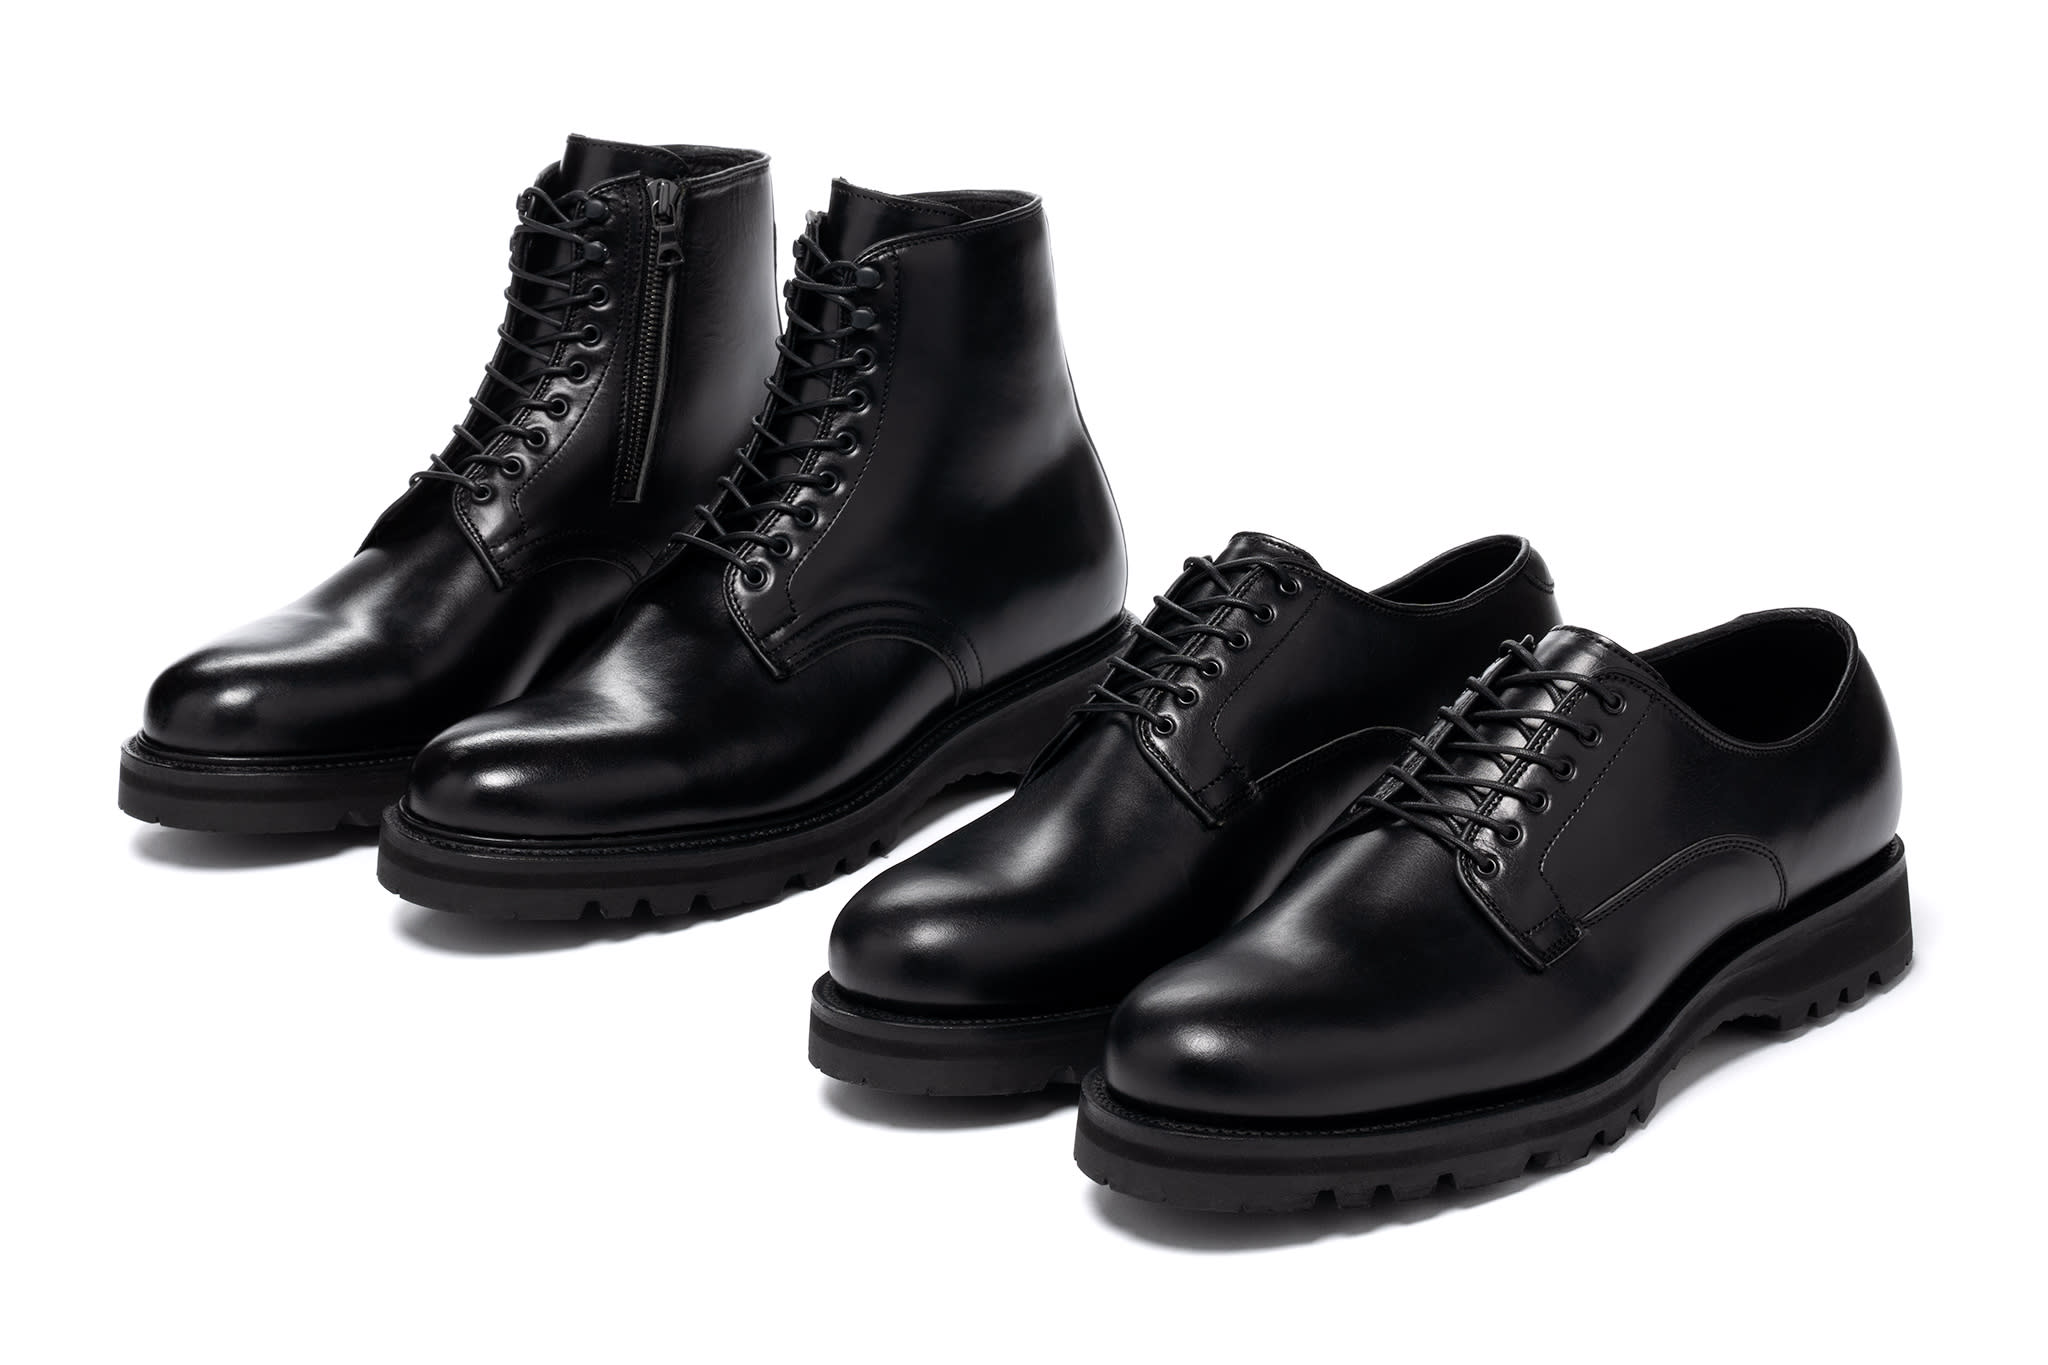 HAVEN / Viberg Service Boot and Officer 